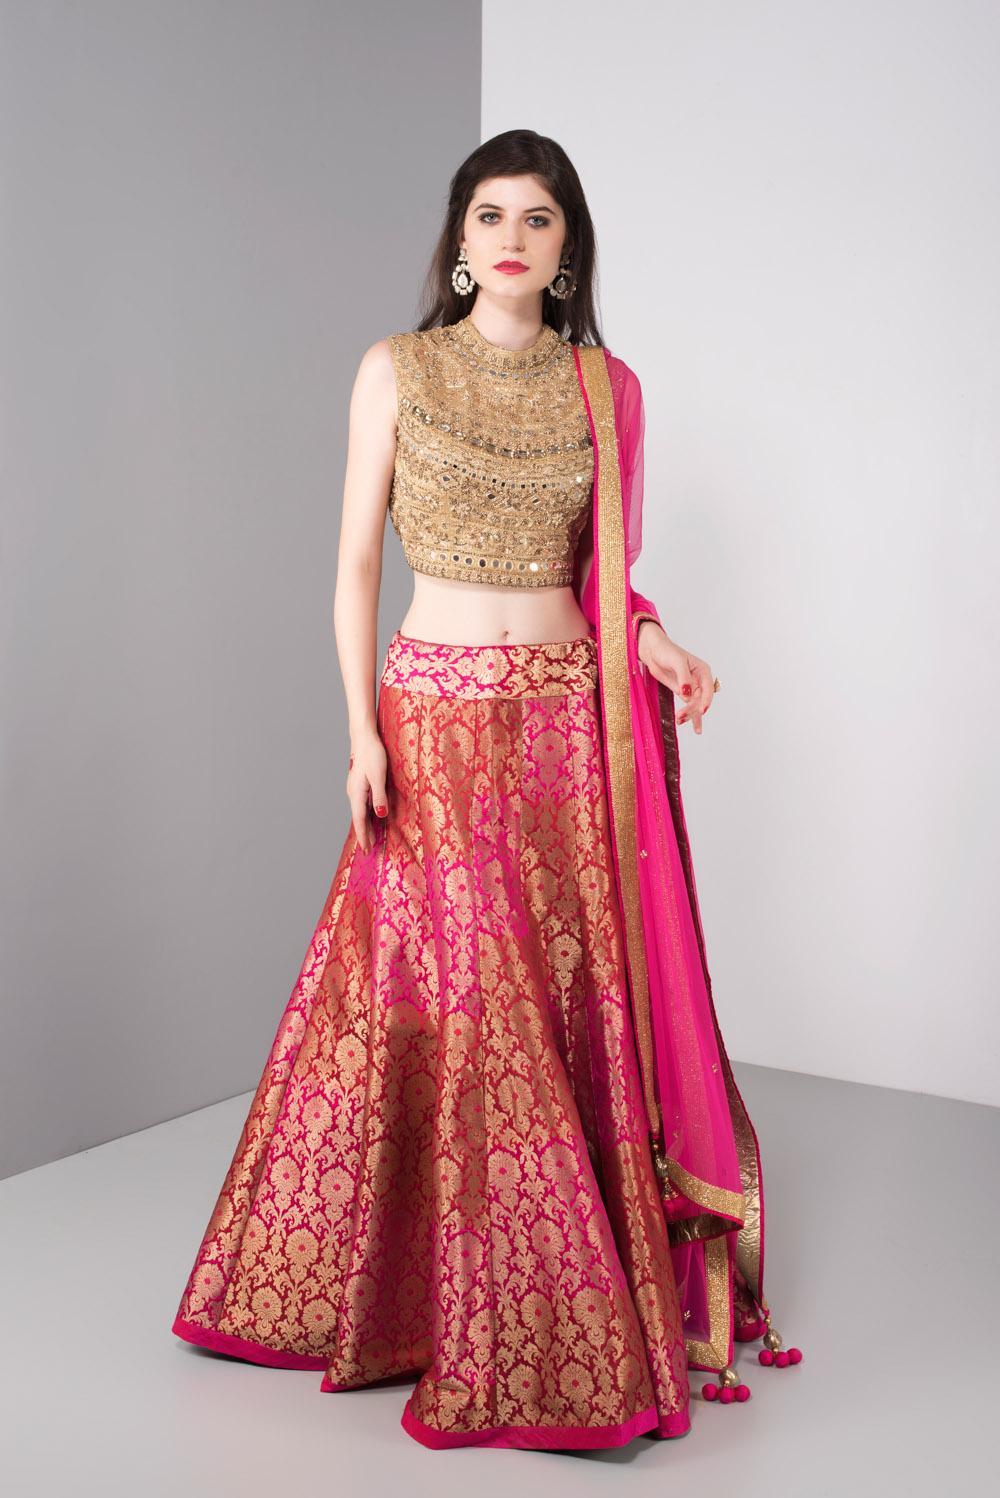 Waidurya - HIGH SHINE lehenga is BEYOND! It's a 100% real mirror work hand  embroidered beauty with the most glamorous simple design. The blouse is  pure mirror work and it's definitely an